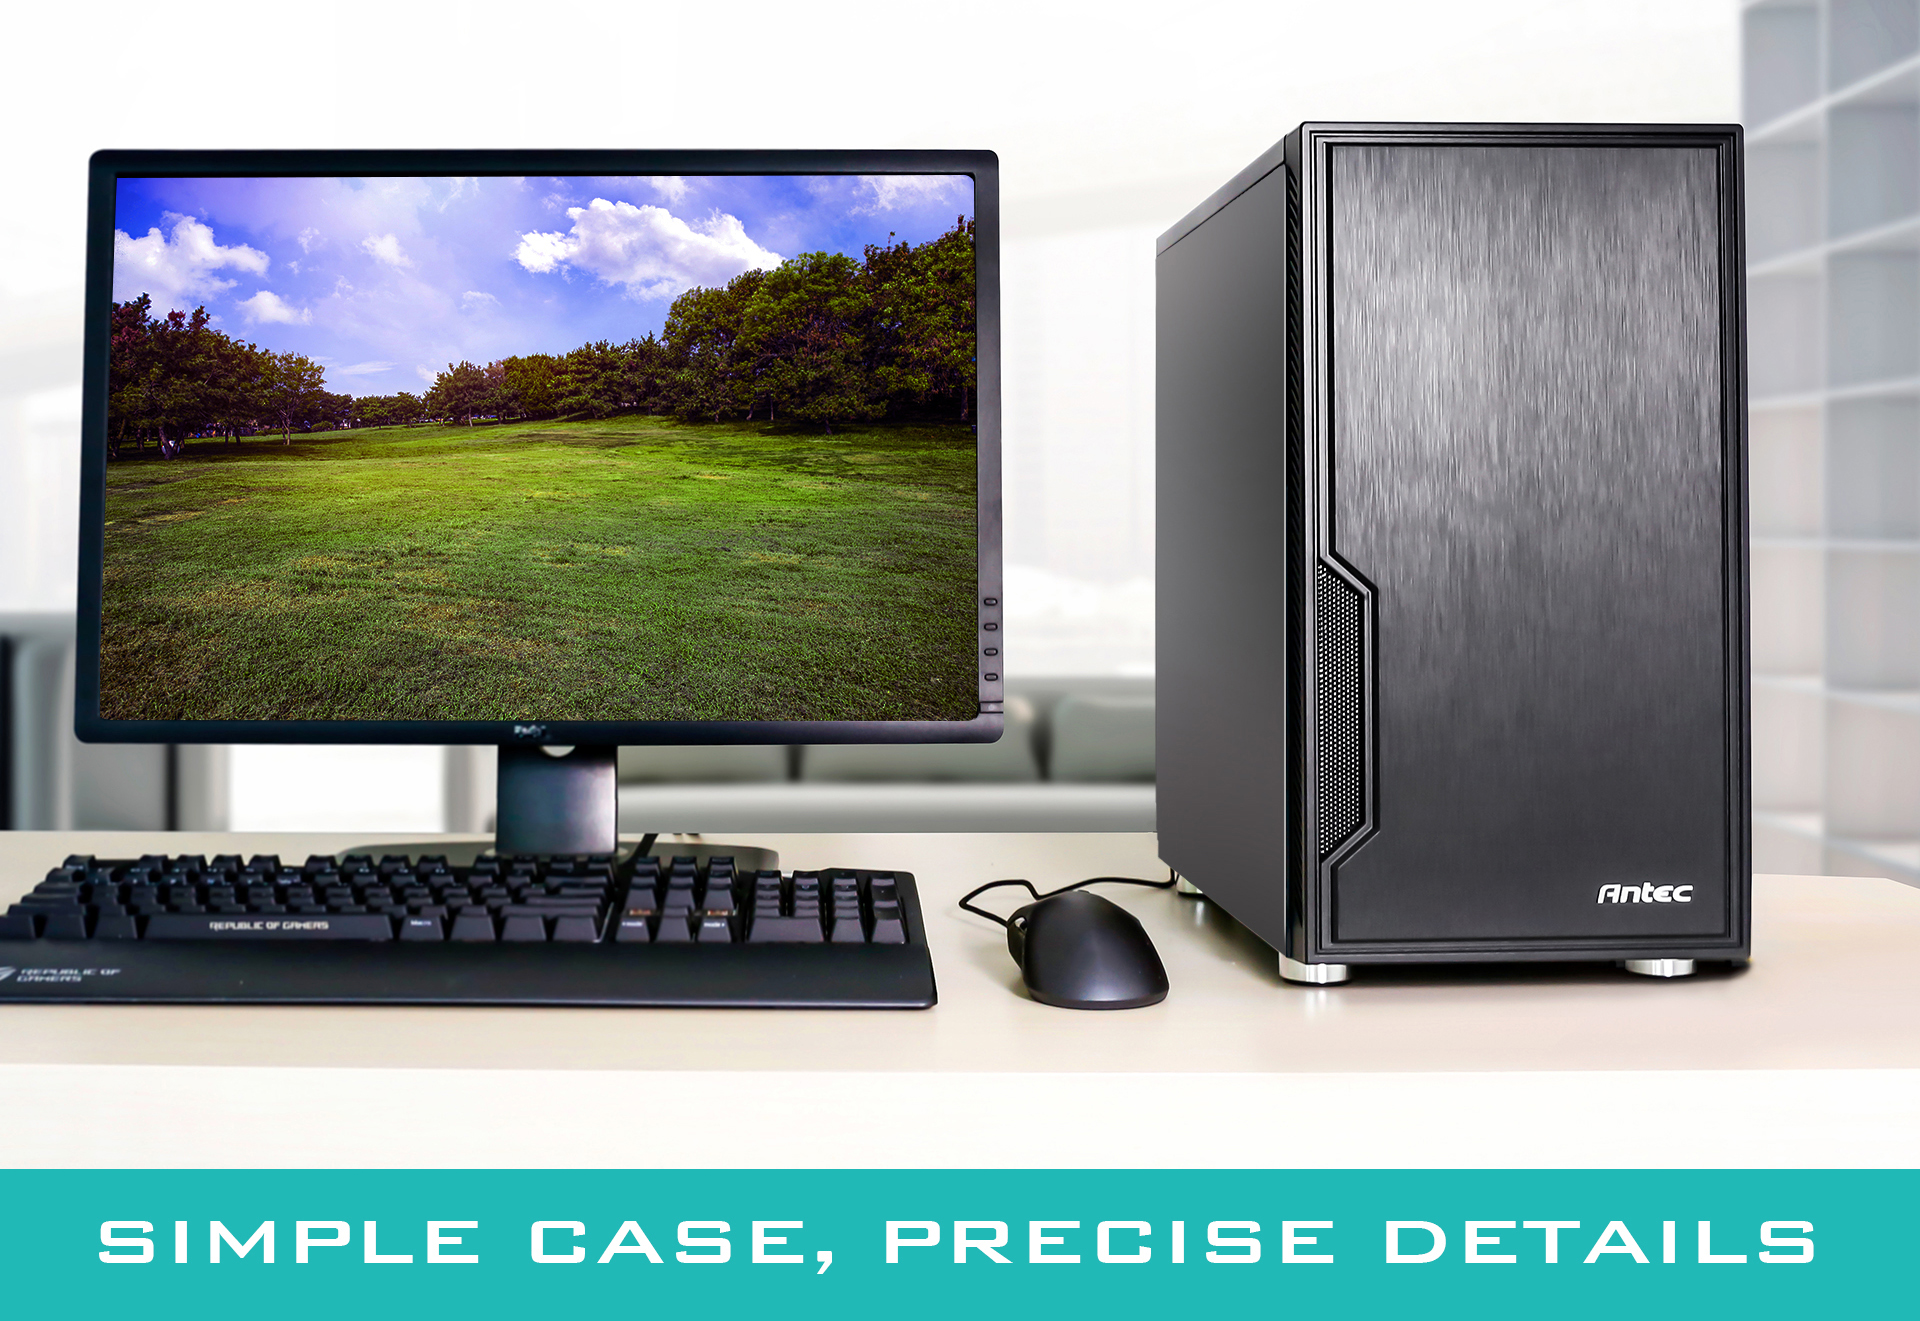 Antec Case Facing Forward on a Desk Next to a Mouse, Keyboard and Monitor That Has a Aegis Video-Game Plane Schematics on Screen. below the image is text that reads: SIMPLE CASE, PRECISE DETAILS